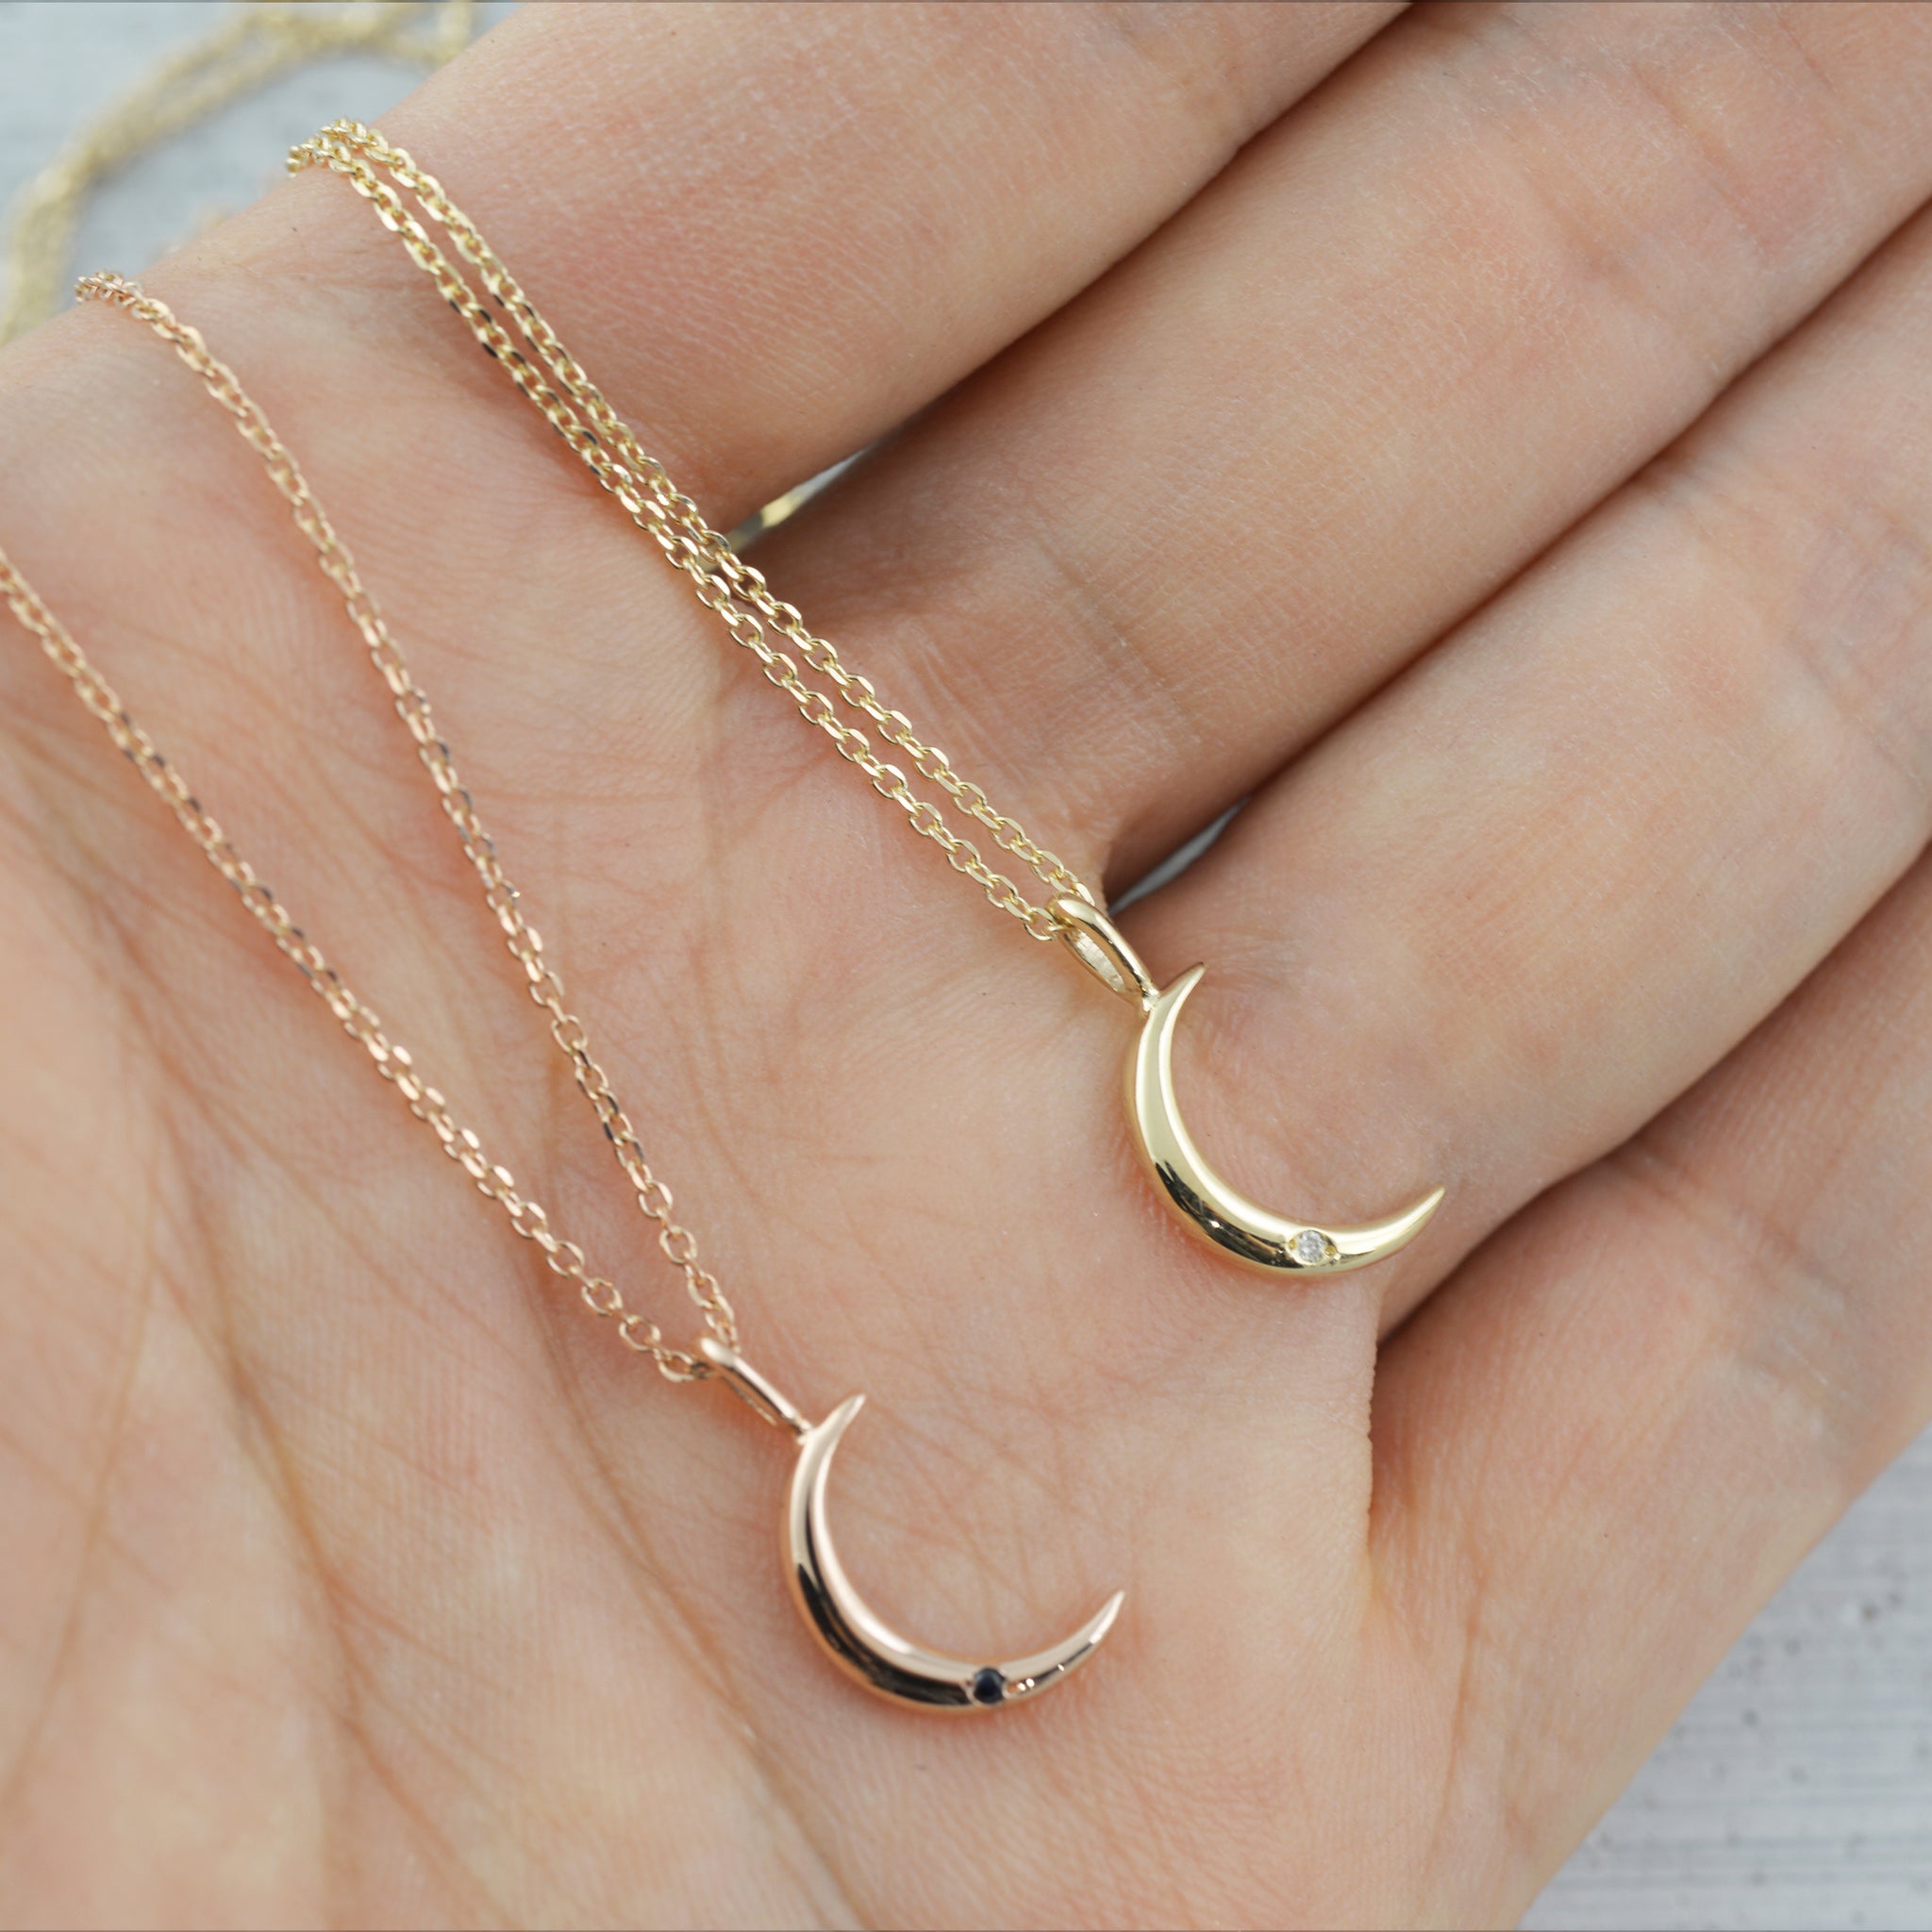 New moon Necklace - 14K/ 18K Gold